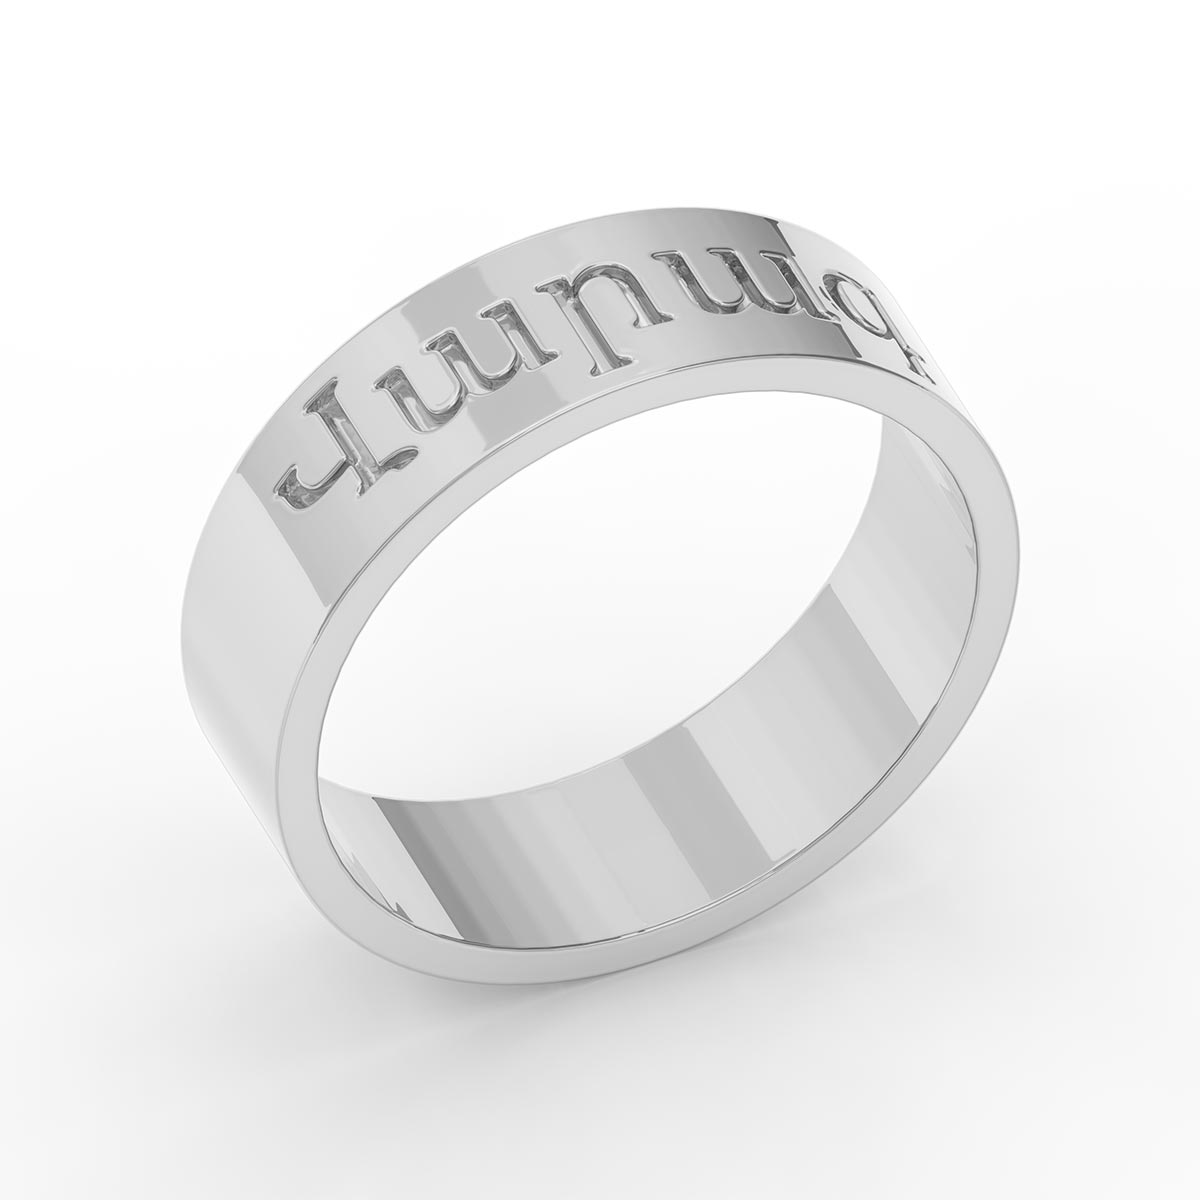 Men's Wide Ring With Armenian Name Engraving